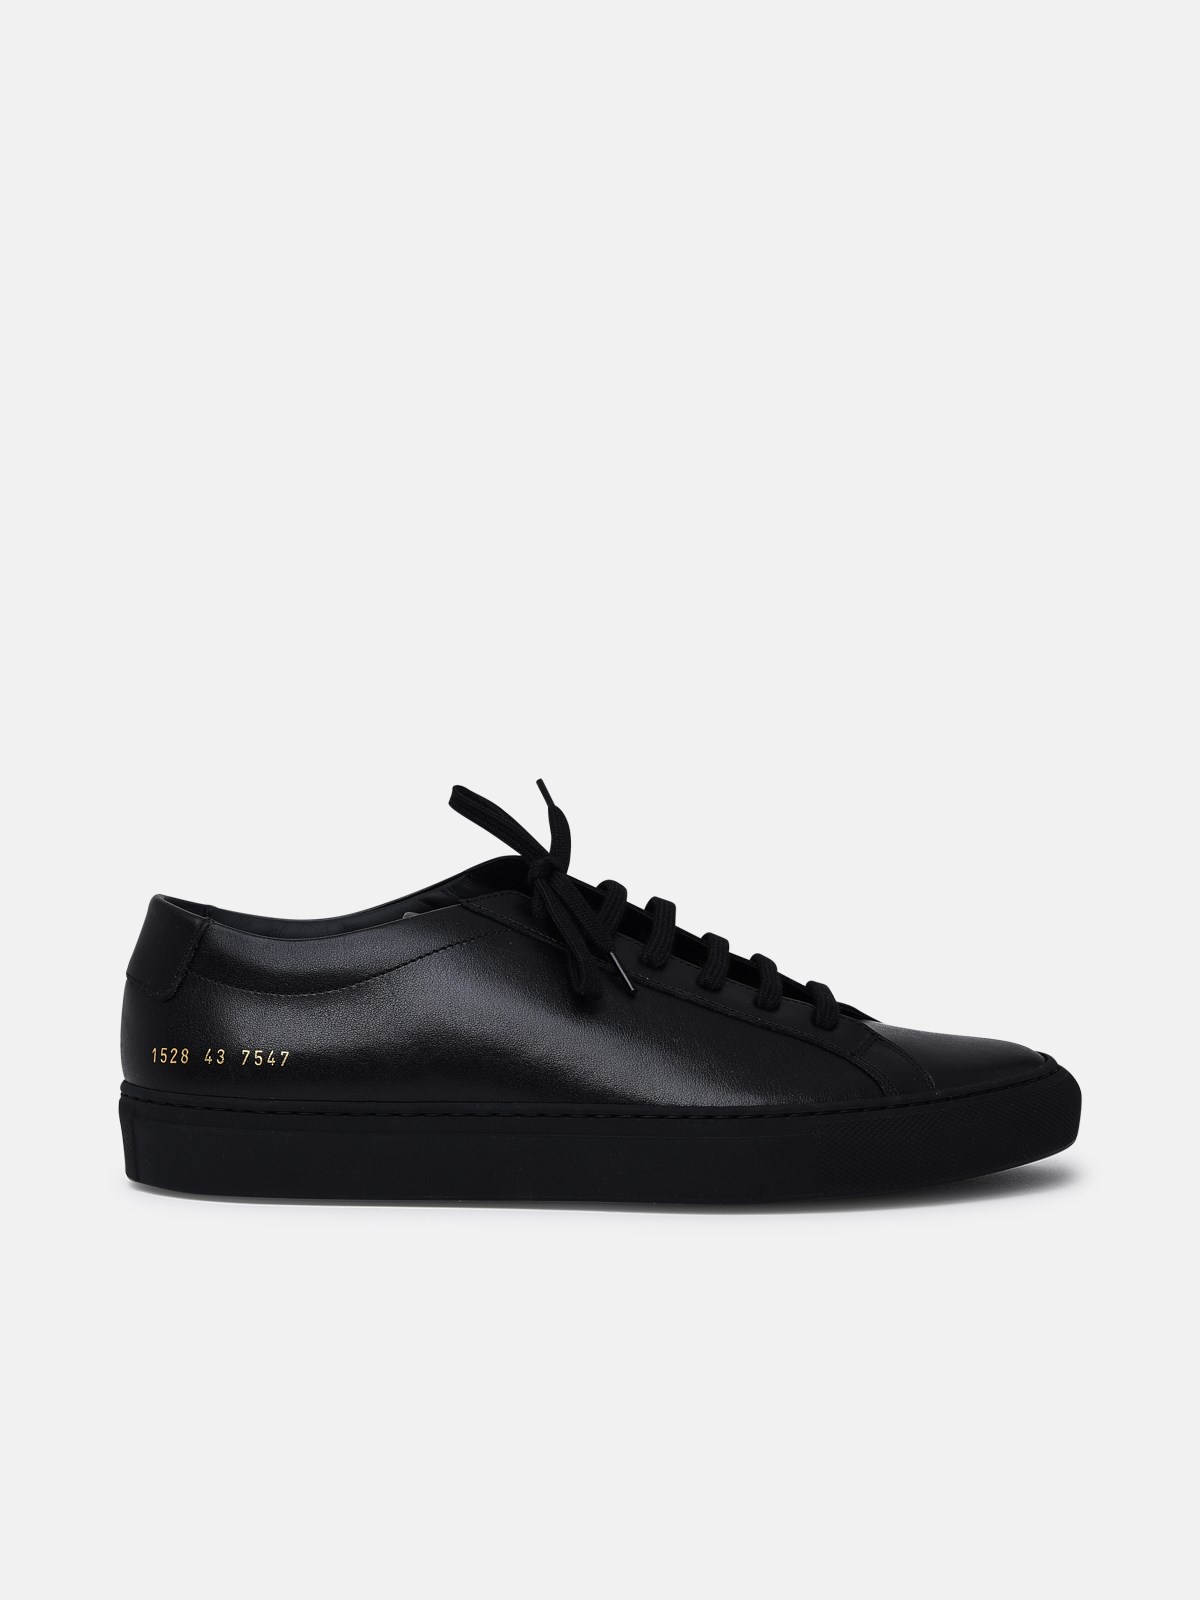 COMMON PROJECTS BLACK LEATHER ACHILLES SNEAKERS